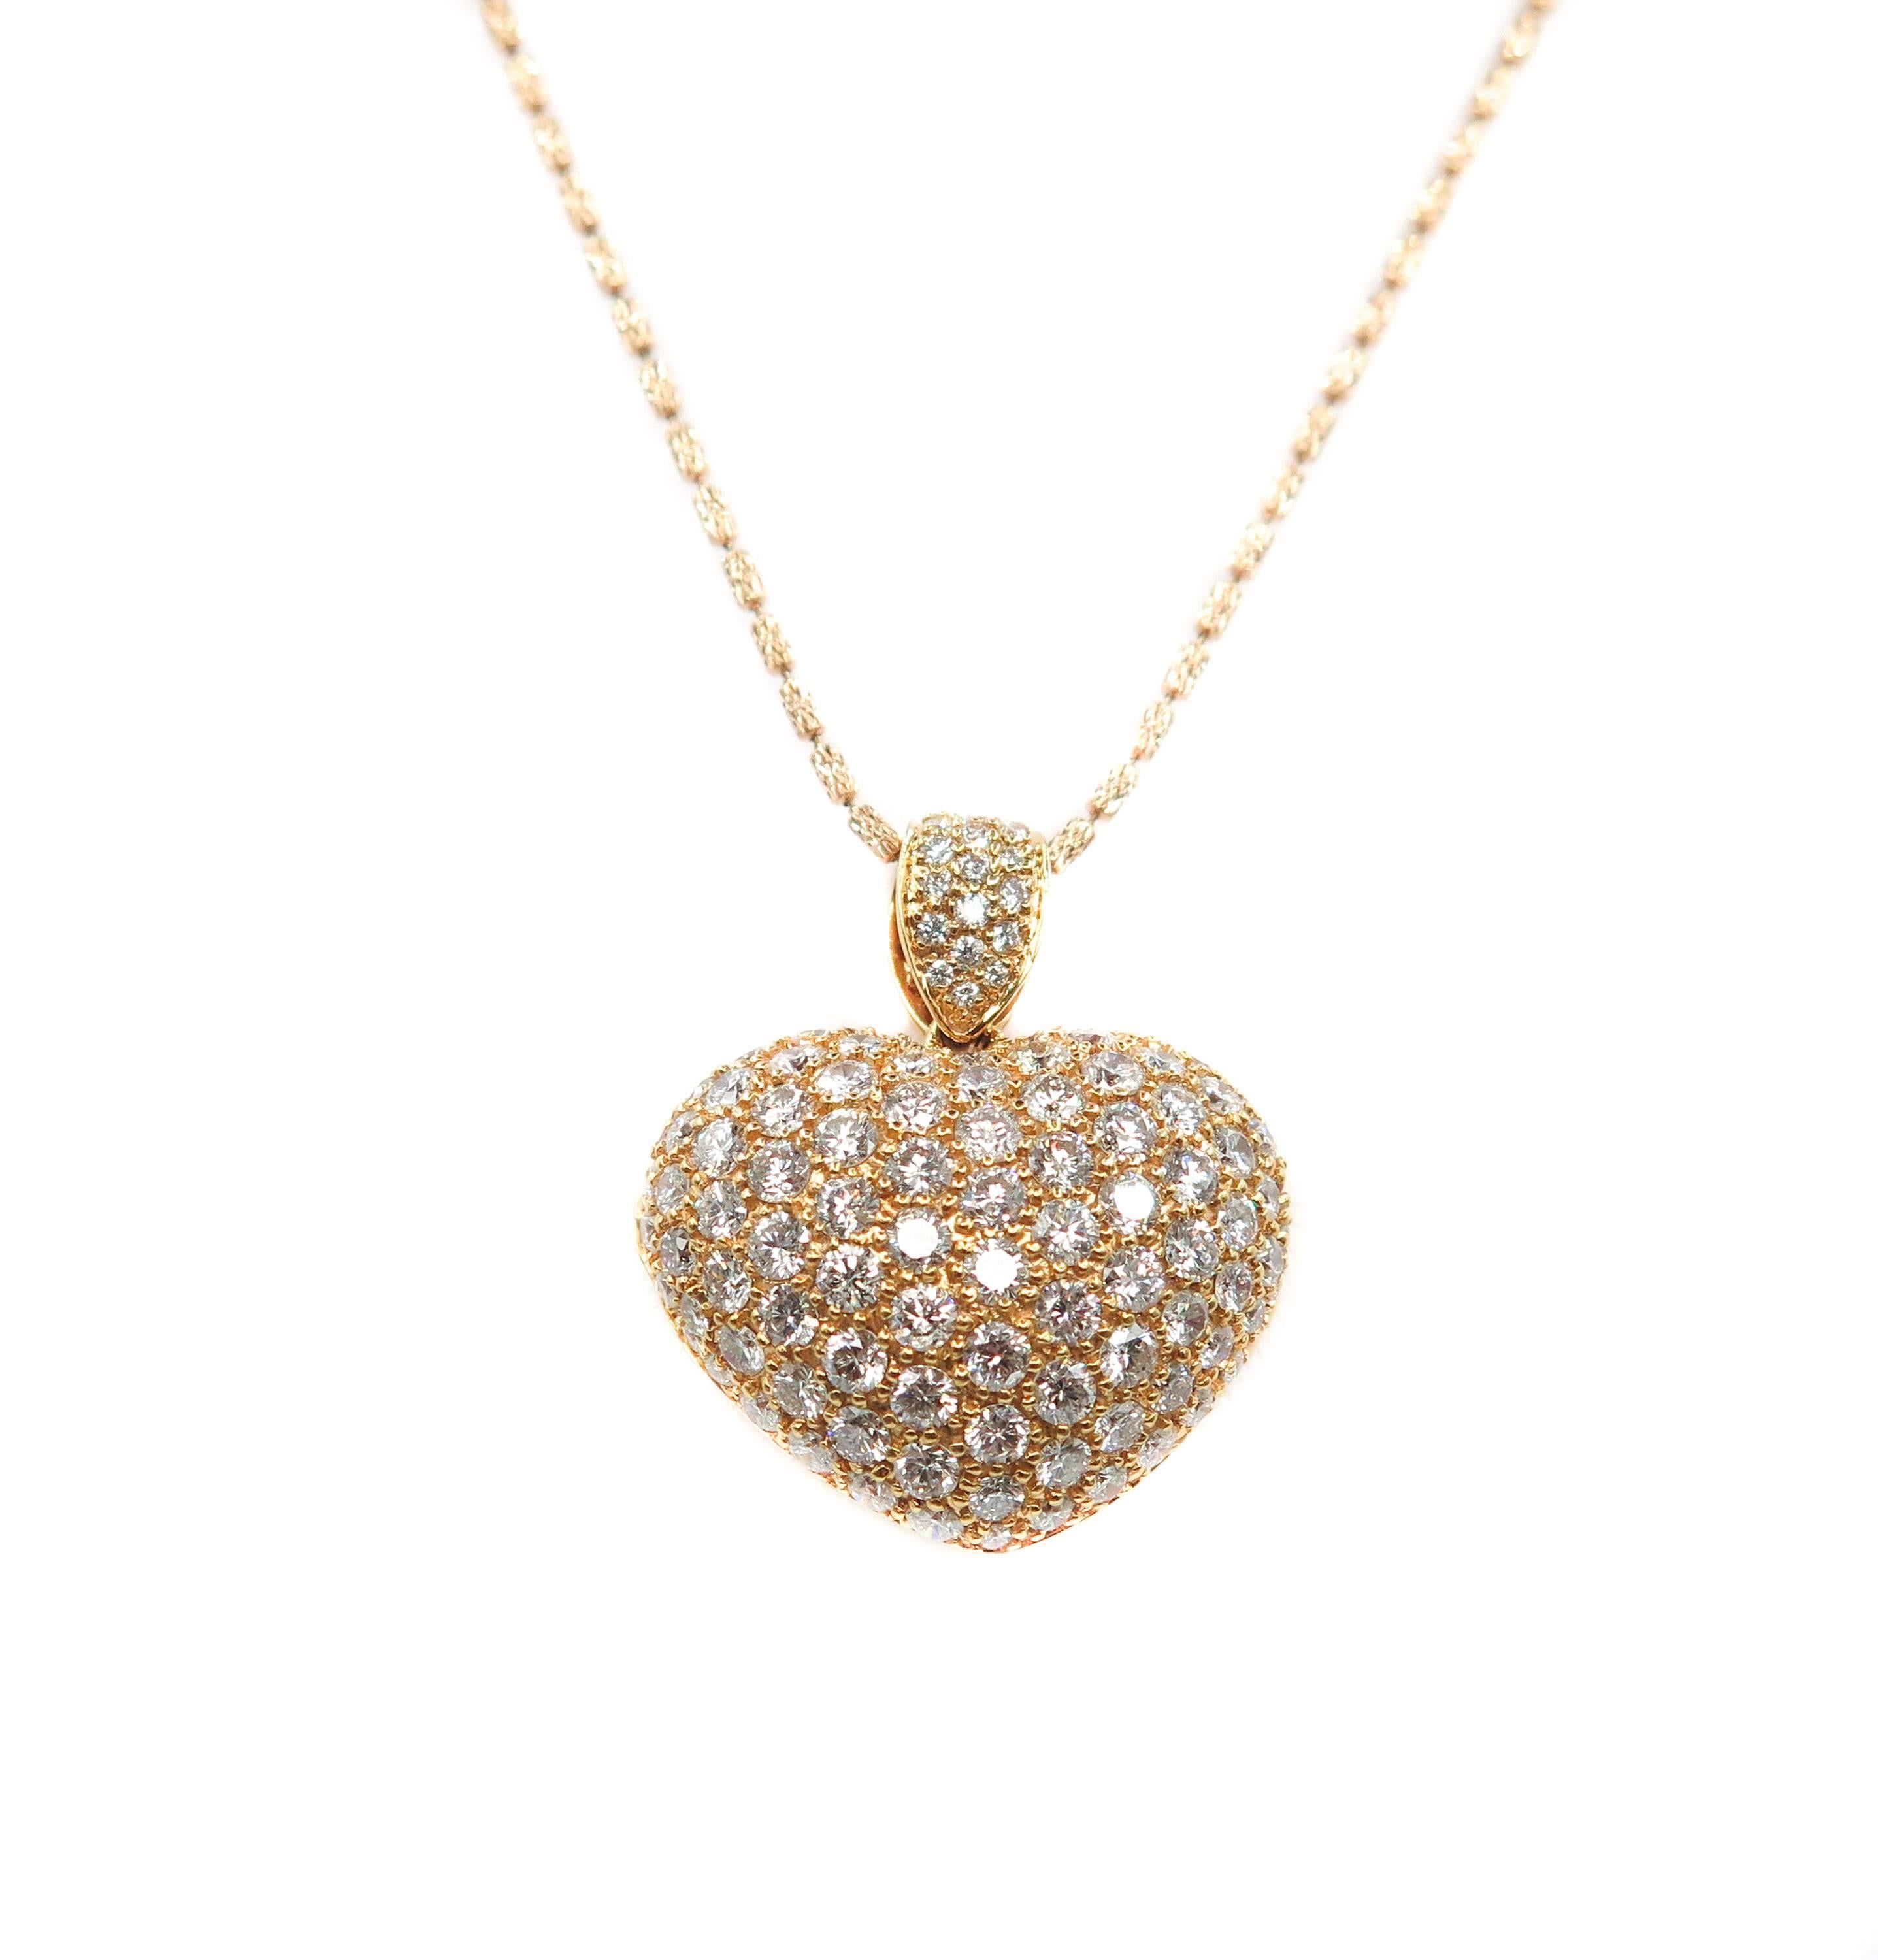 Dating back to the 16th century, Lockets have been a treasured keepsake worn close to the heart as a reminder of special loved ones or occasions.  
The same holds true today making this diamond pave locket the prefect any time gift.  
This estate